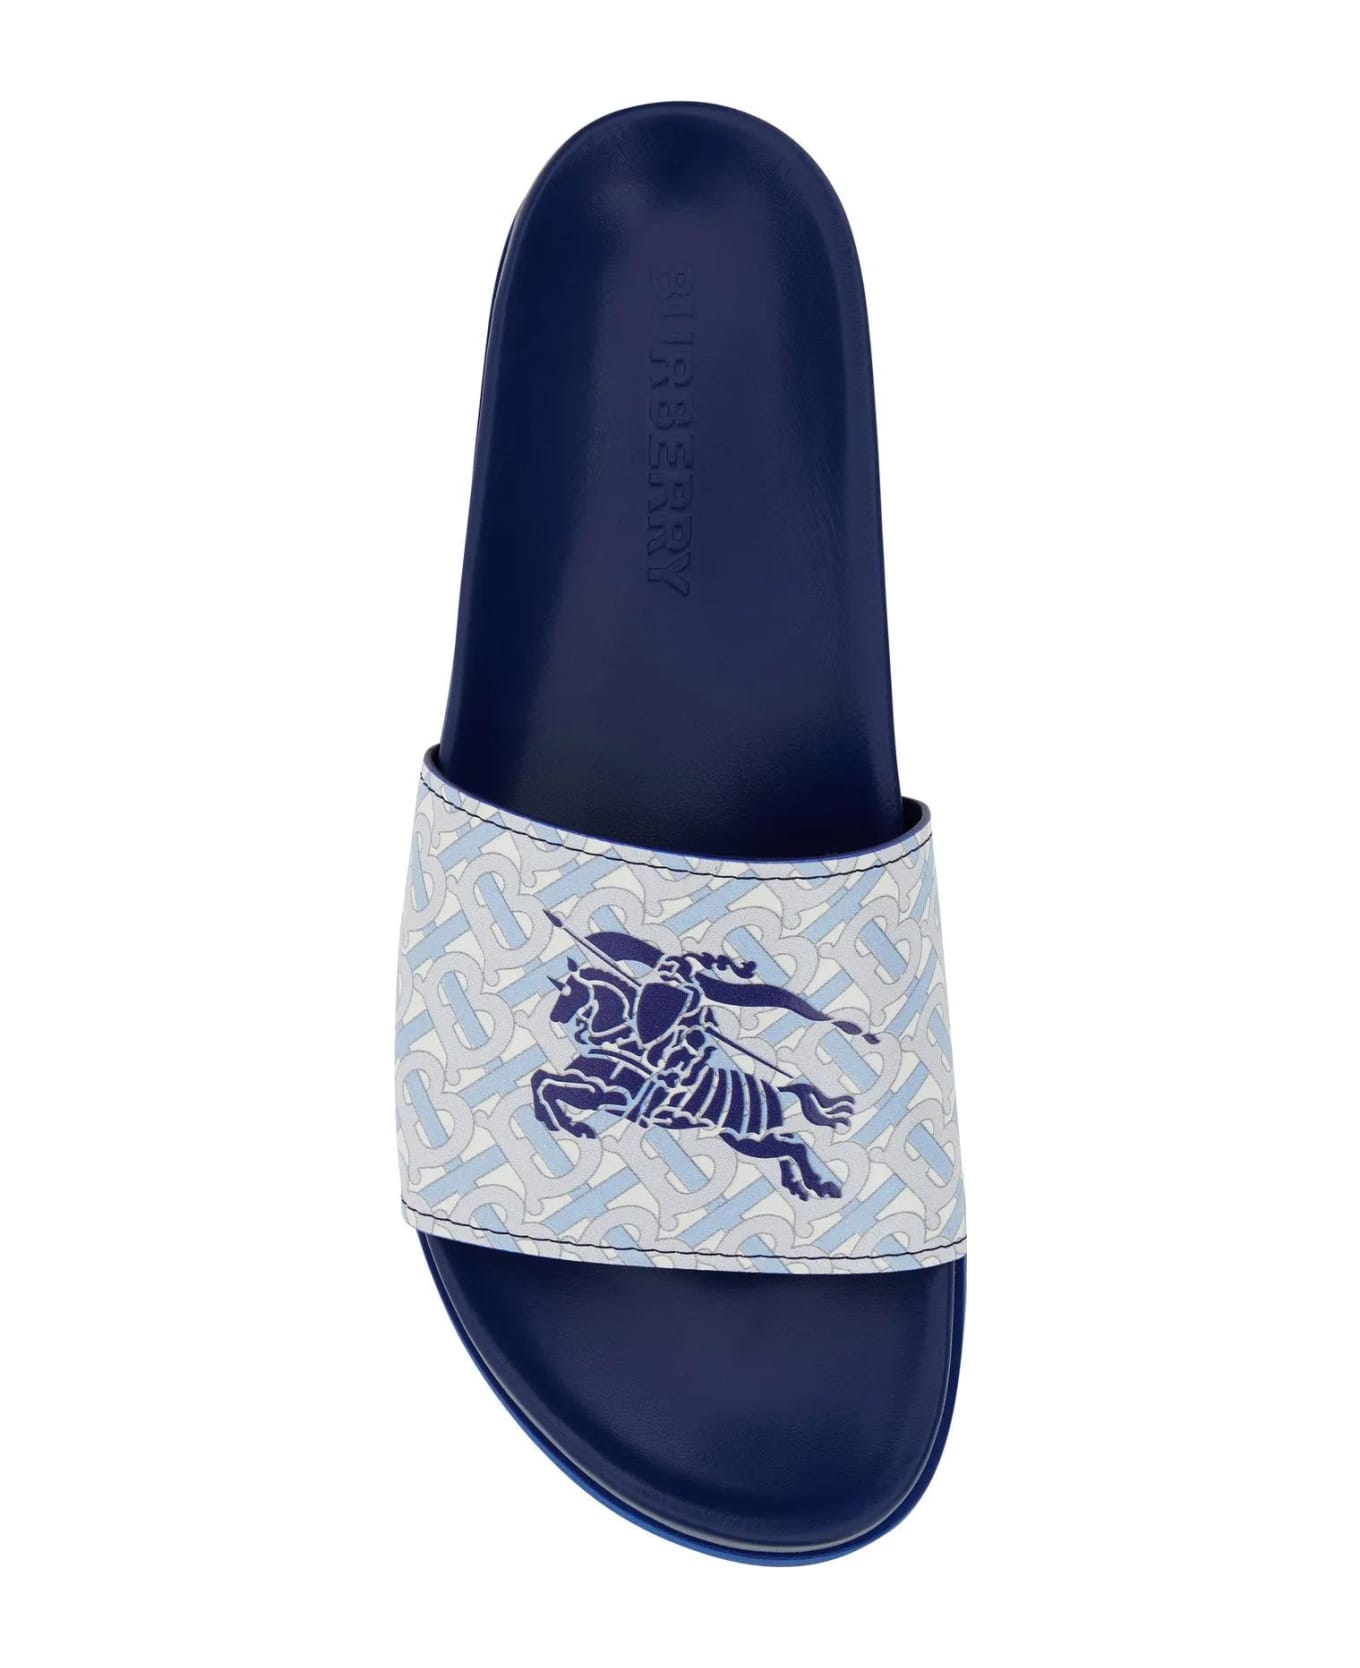 Burberry Printed Leather Slippers - Blue その他各種シューズ